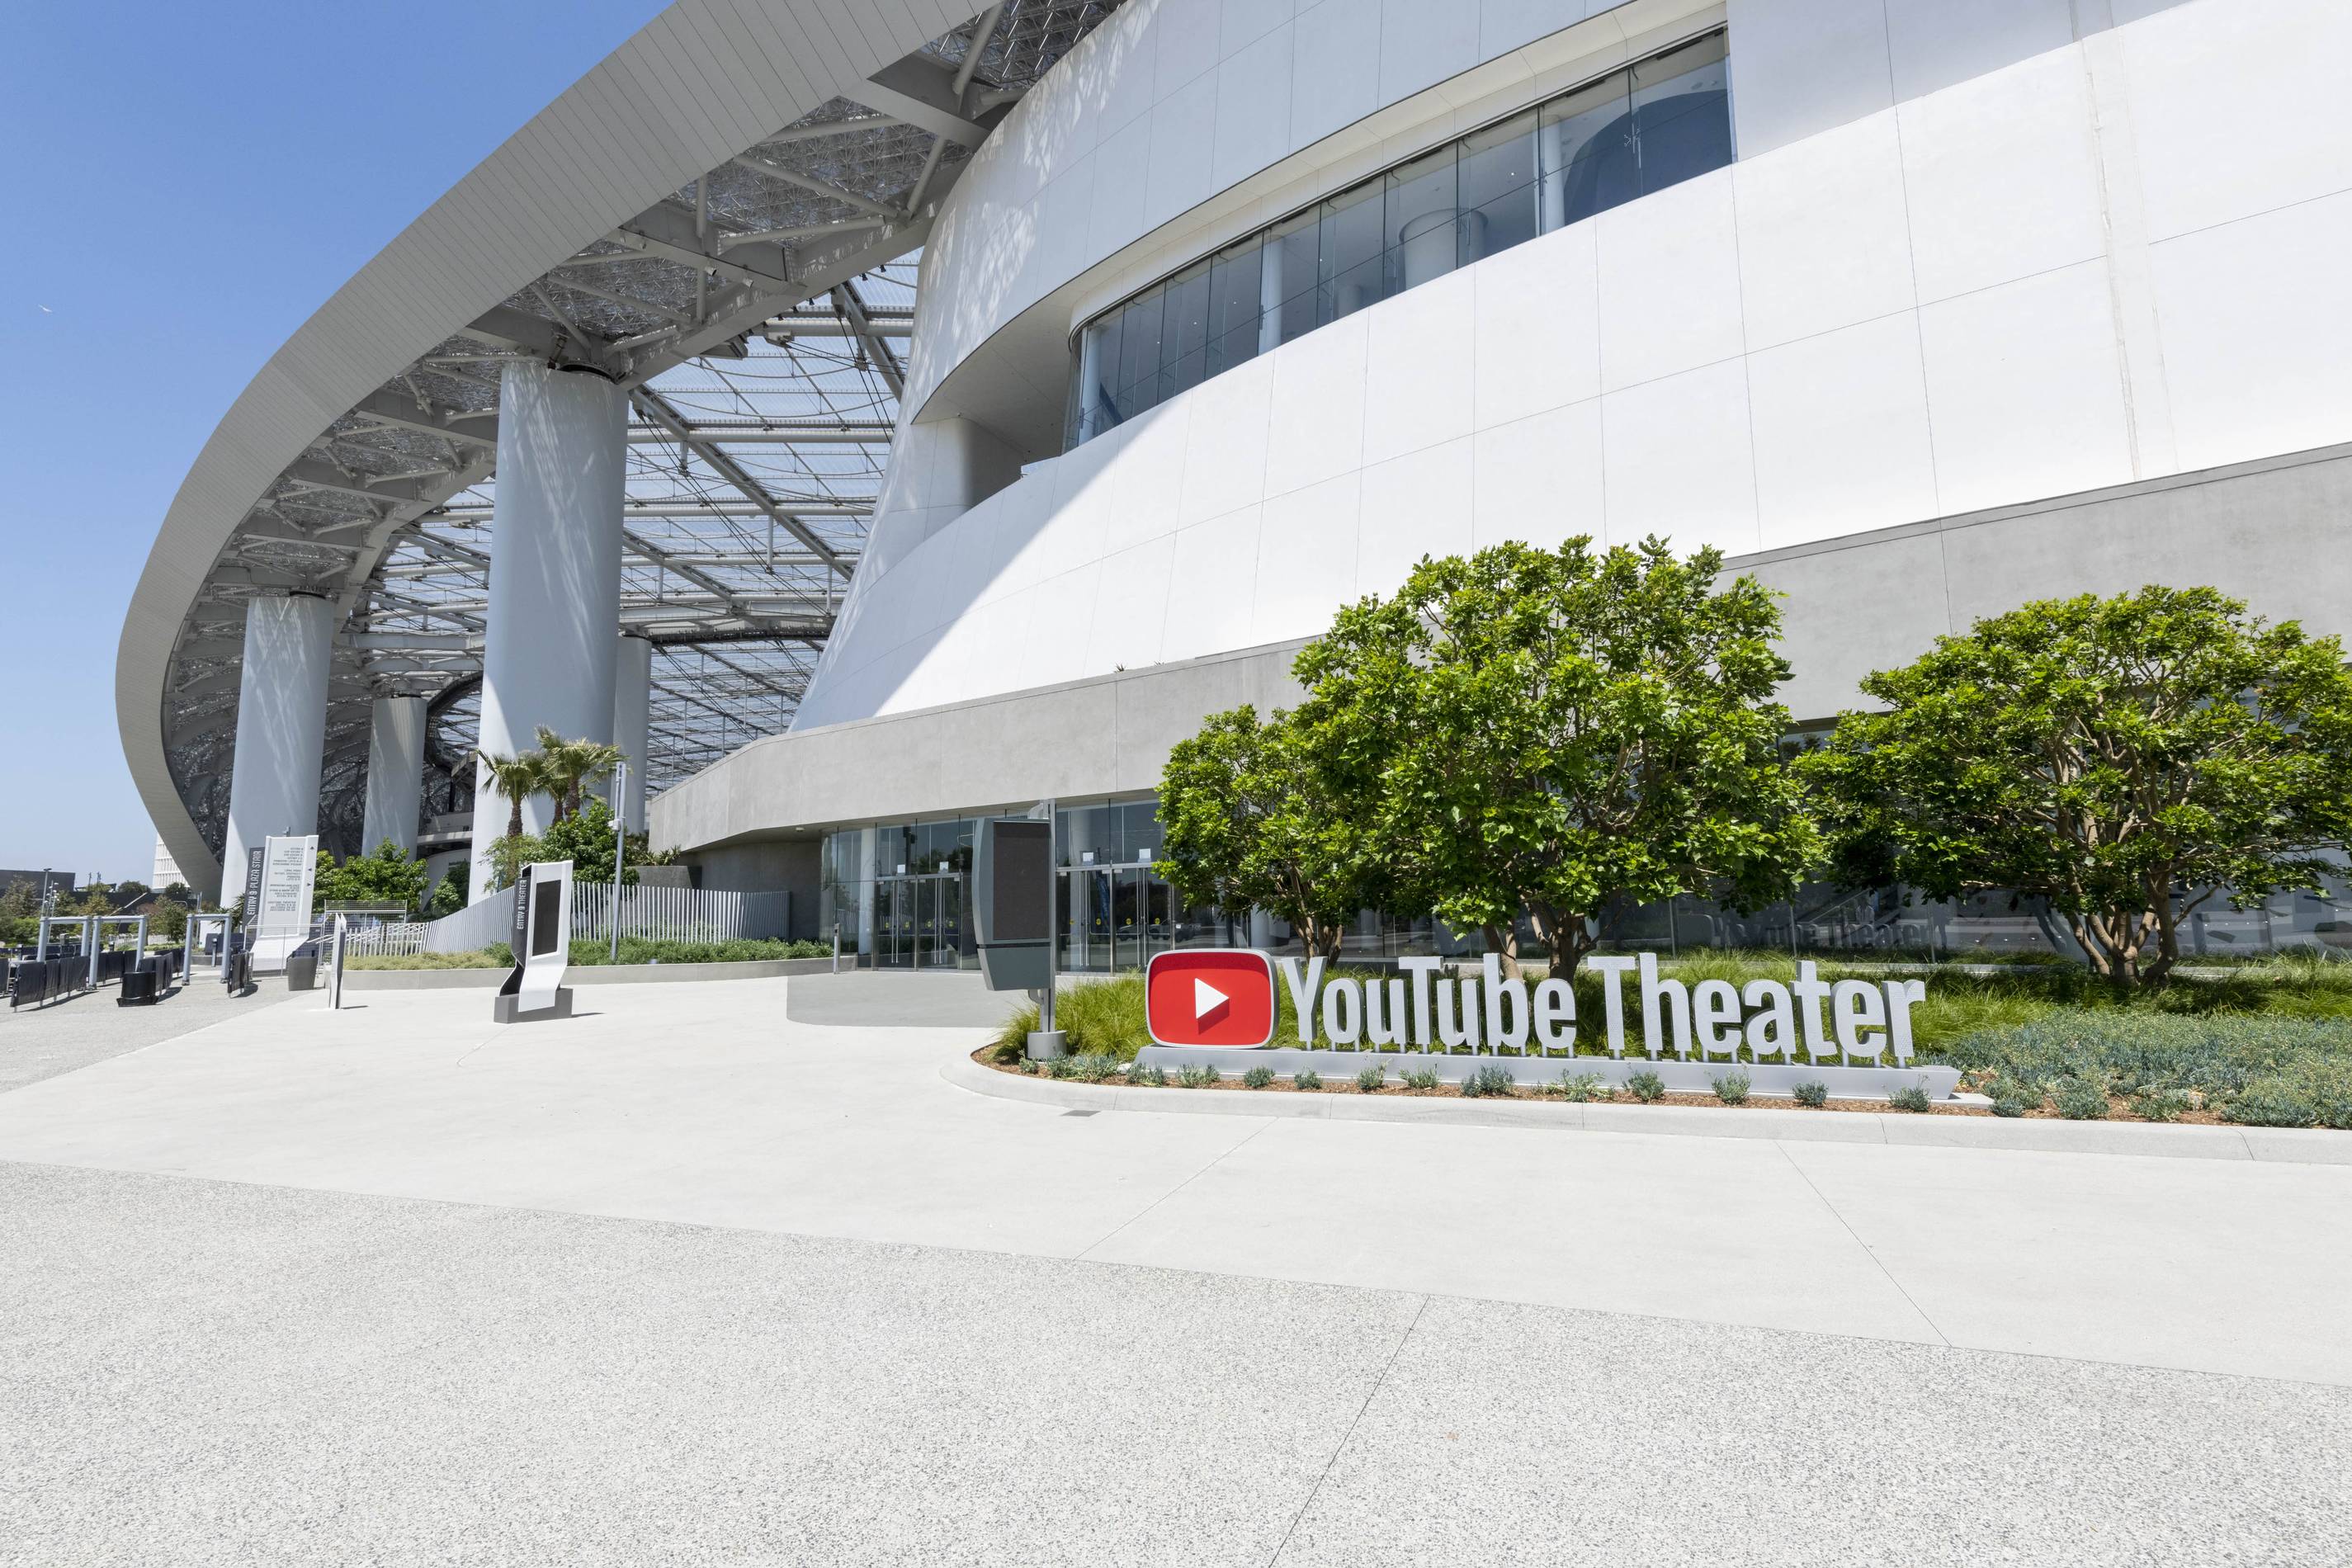 YouTube Theater south exterior